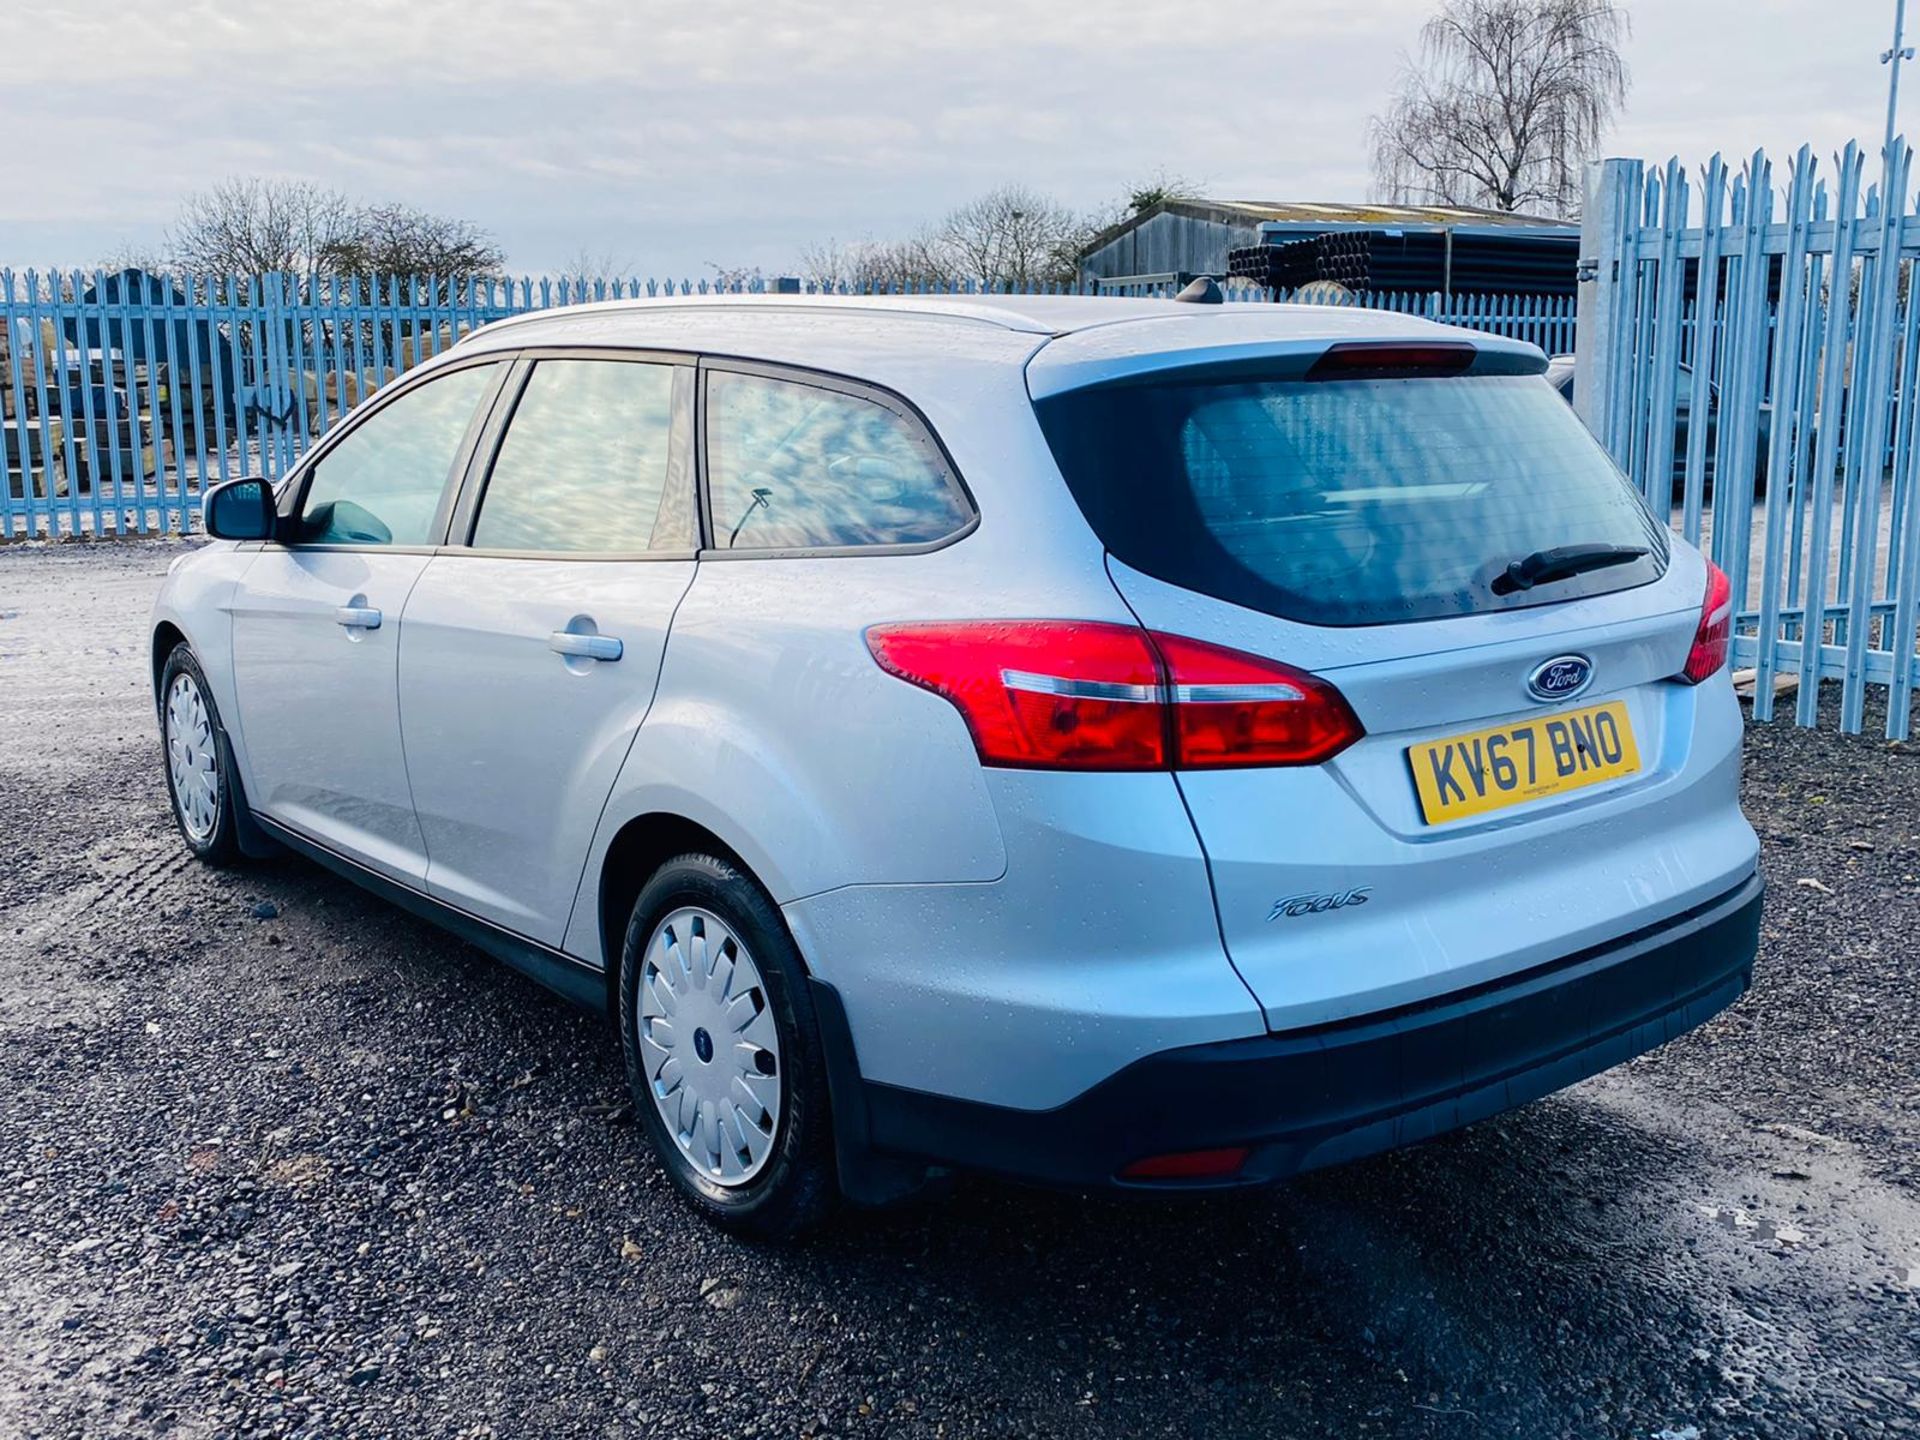 (RESERVE MET) Ford Focus Estate Style 1.5 TDCI 105Bhp Econetic - 2018 Model - Air Con - Image 5 of 29